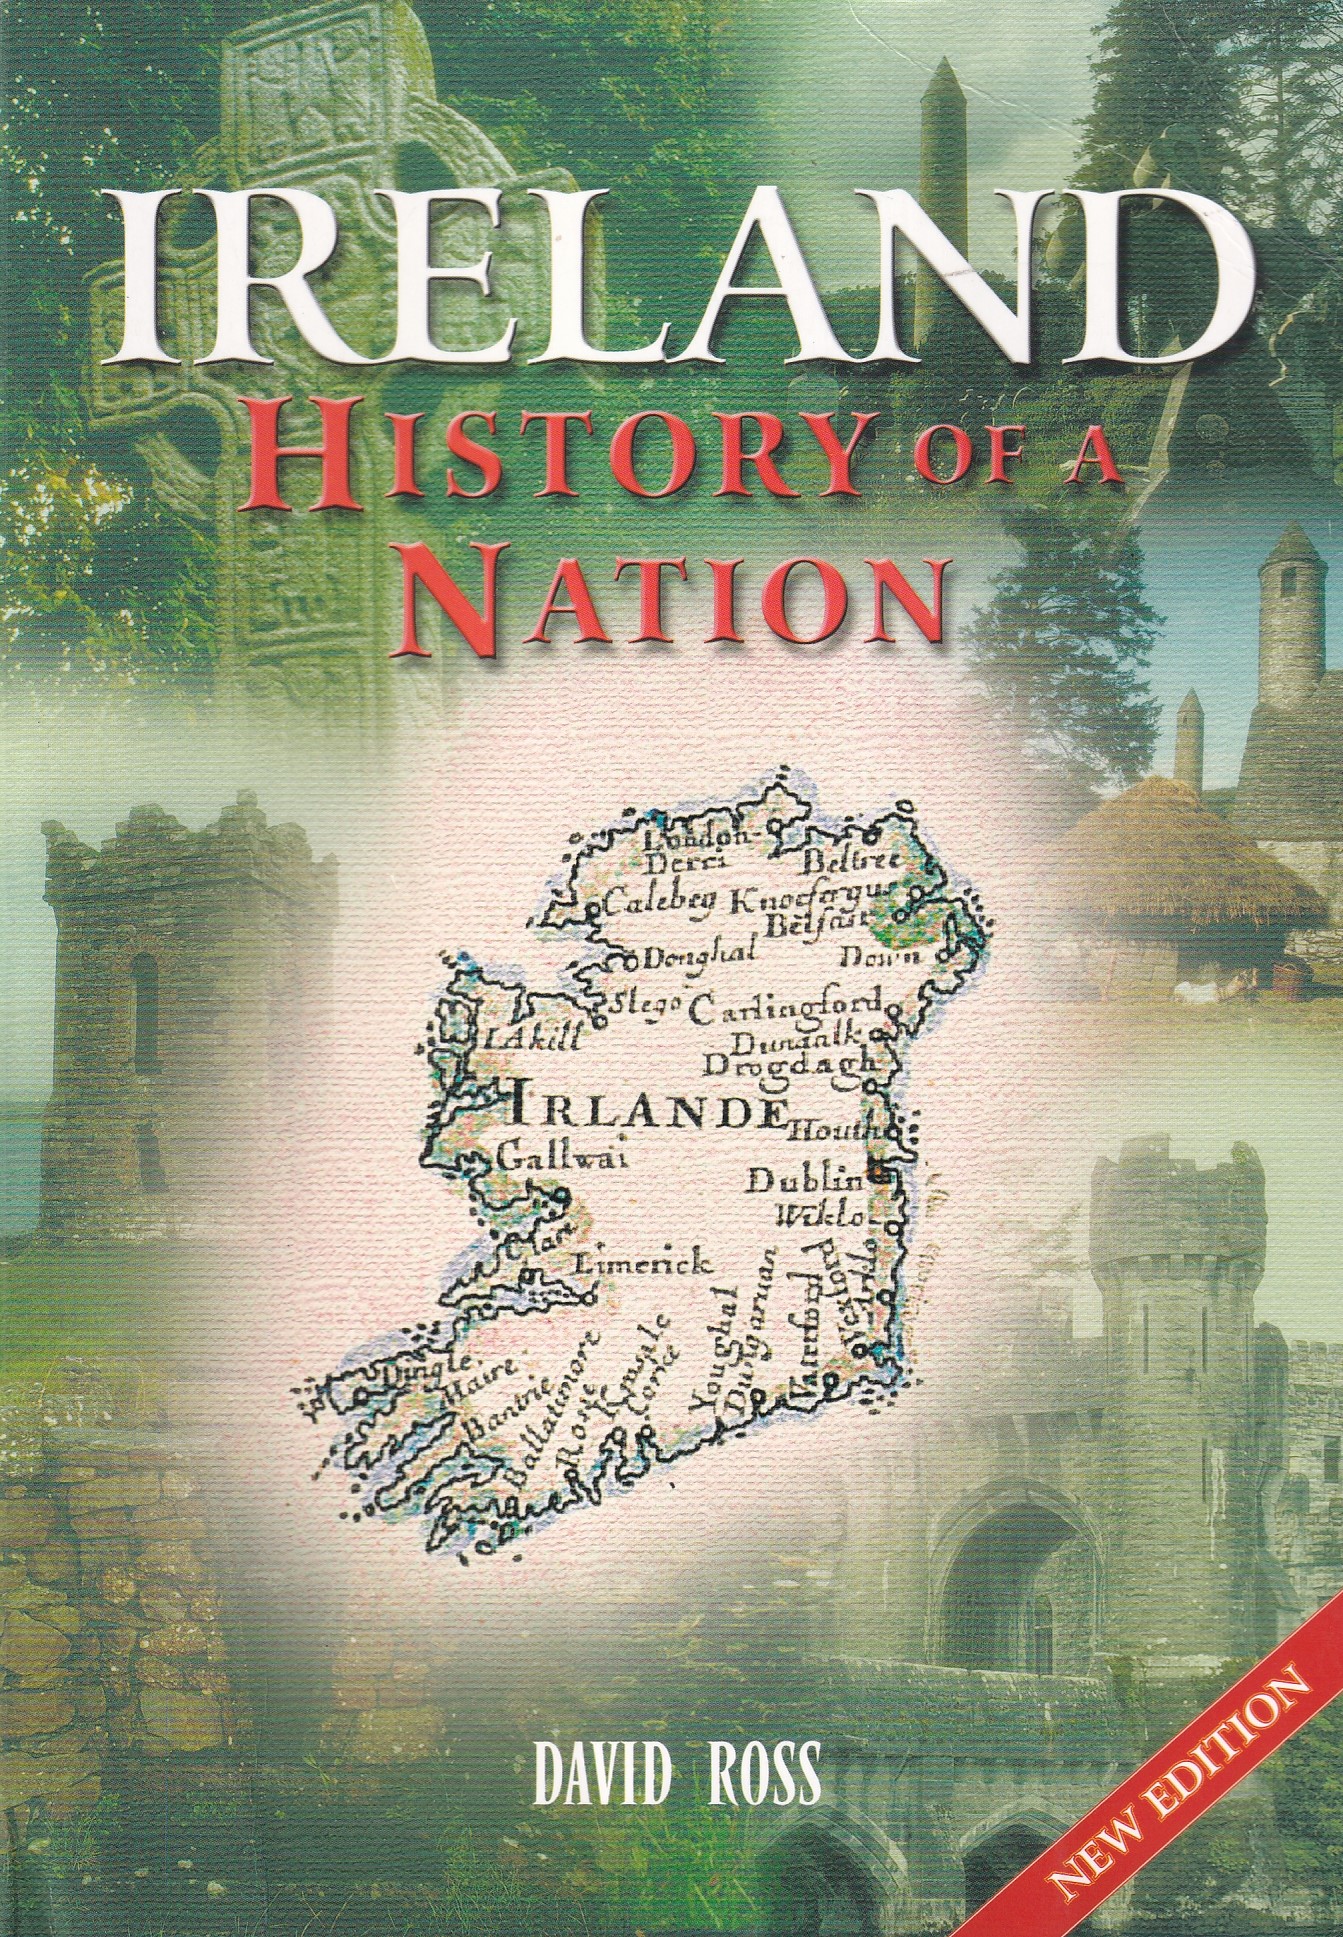 Ireland: History of a Nation by David Ross